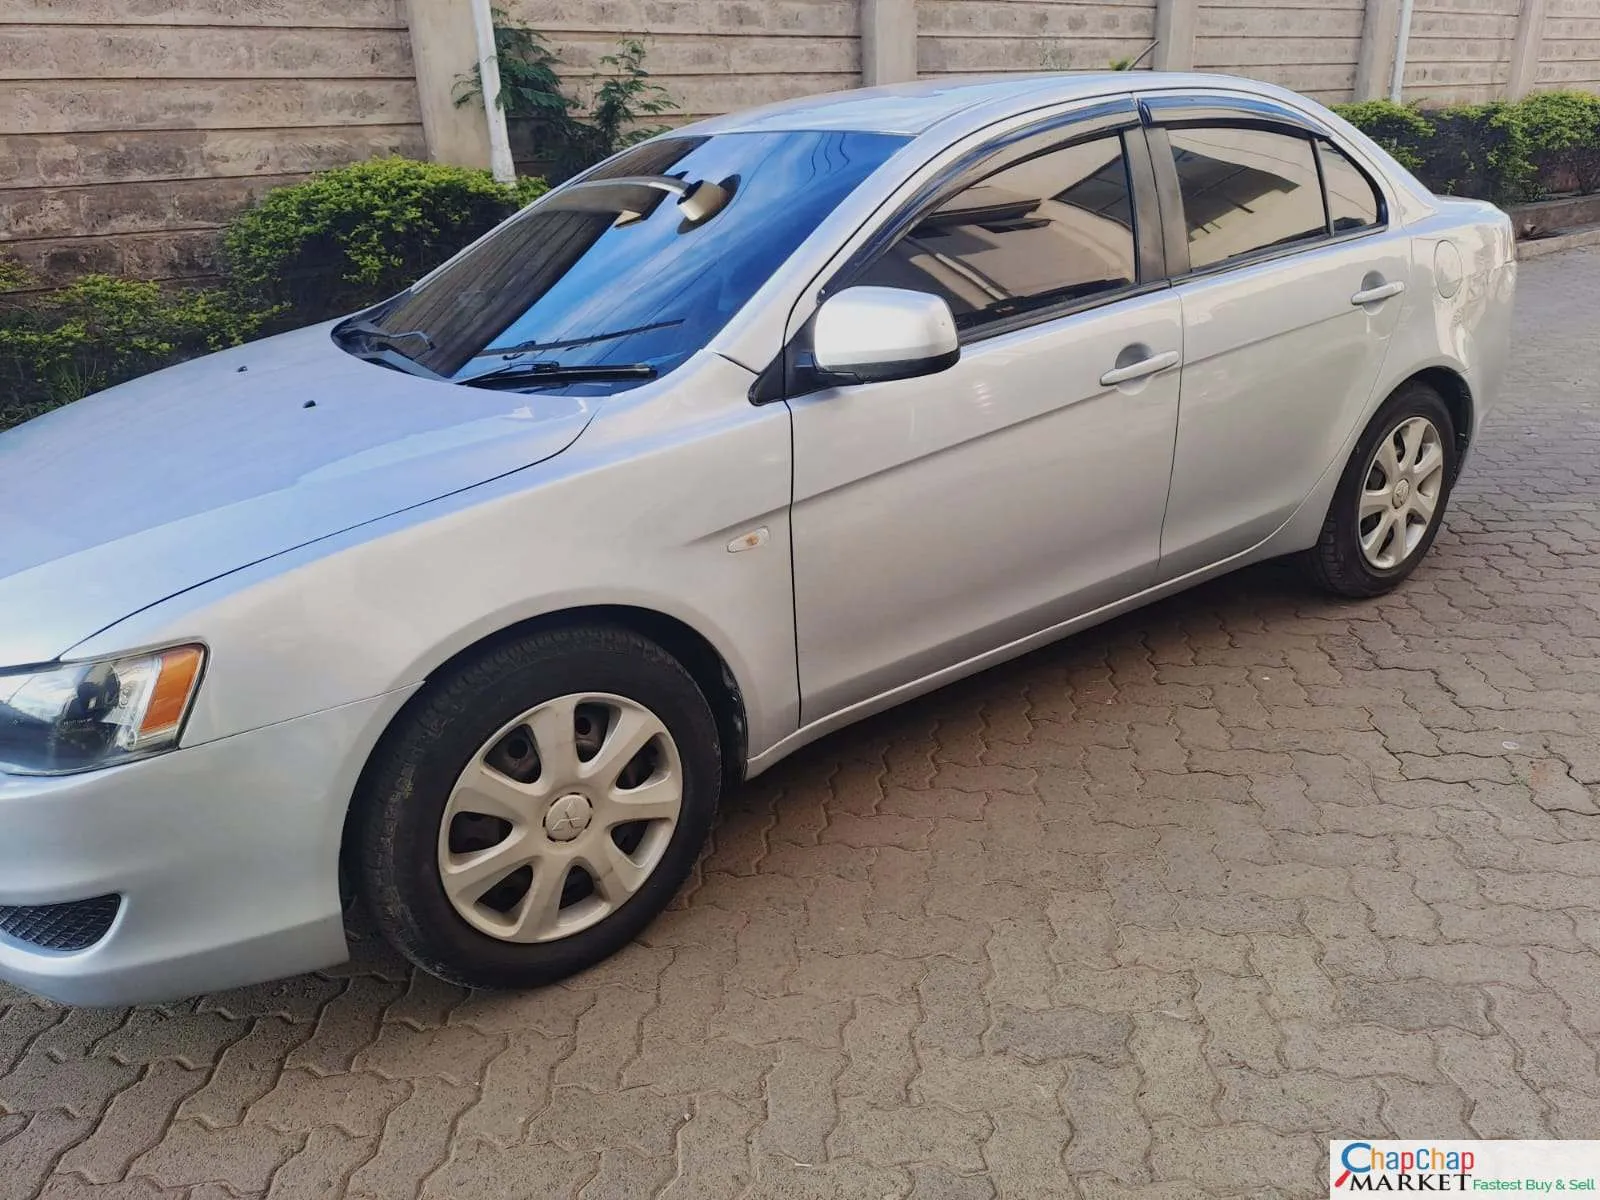 Cars Cars For Sale-Mitsubishi Galant Fortis Quick sale You Pay 30% Deposit Trade in Ok EXCLUSIVE Galant Fortis for sale in kenya hire purchase installments 9